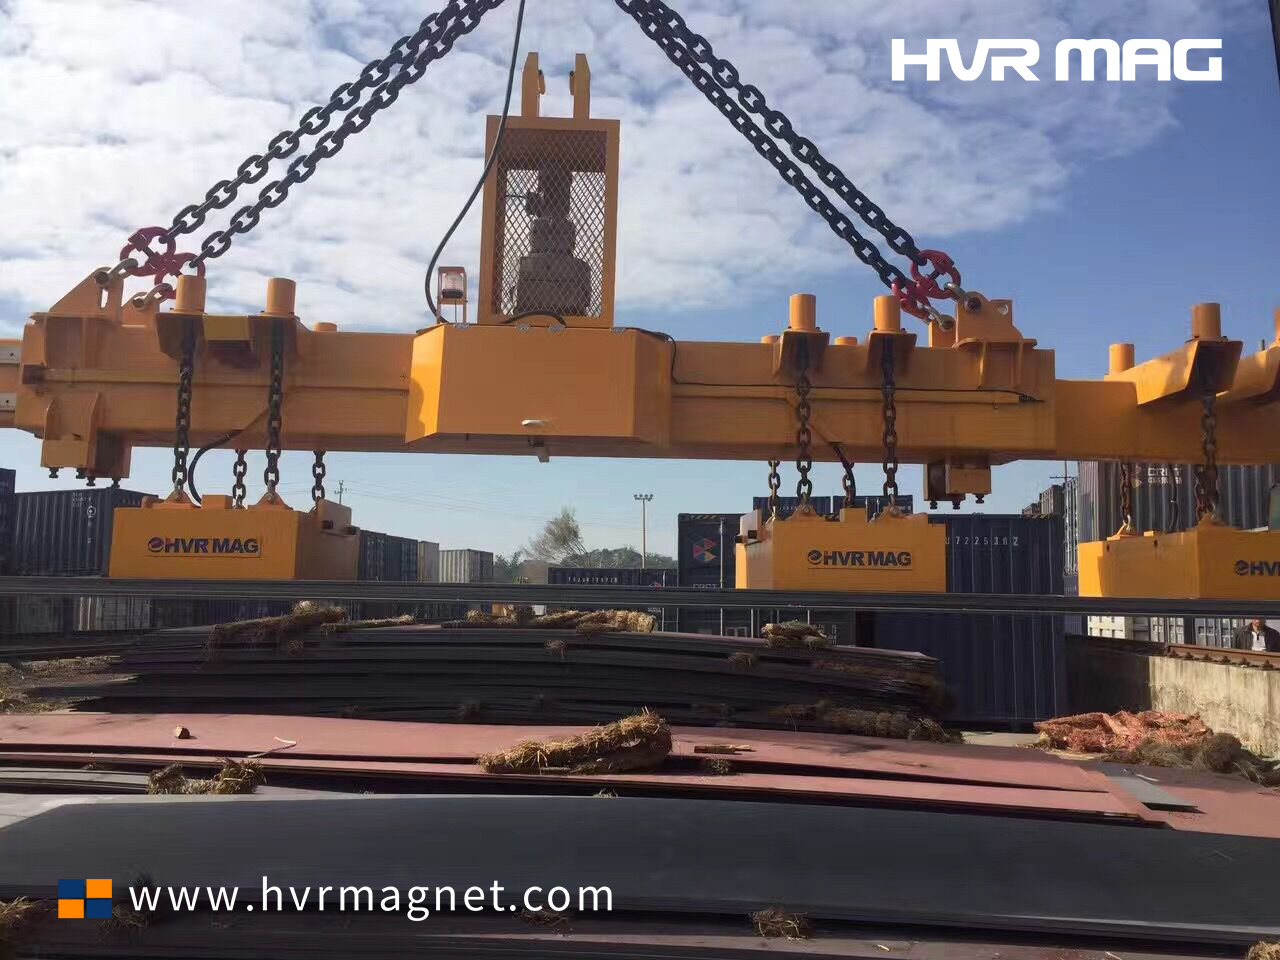 steel plate lifting magnets for multiple sheets in freight yard - HVR MAG